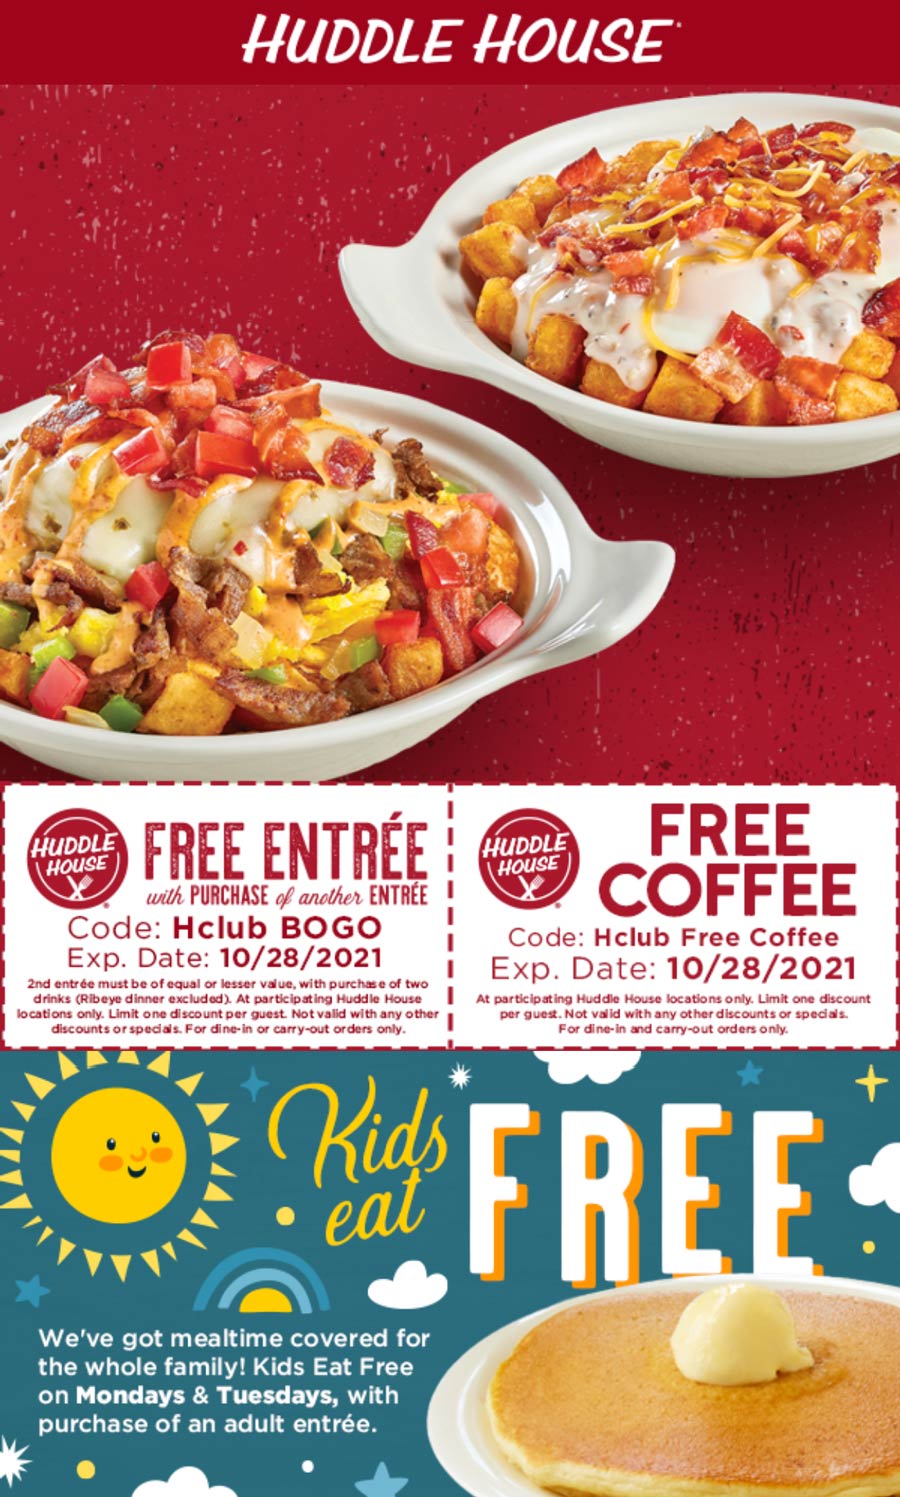 Huddle House restaurants Coupon  Second entree free & more at Huddle House #huddlehouse 